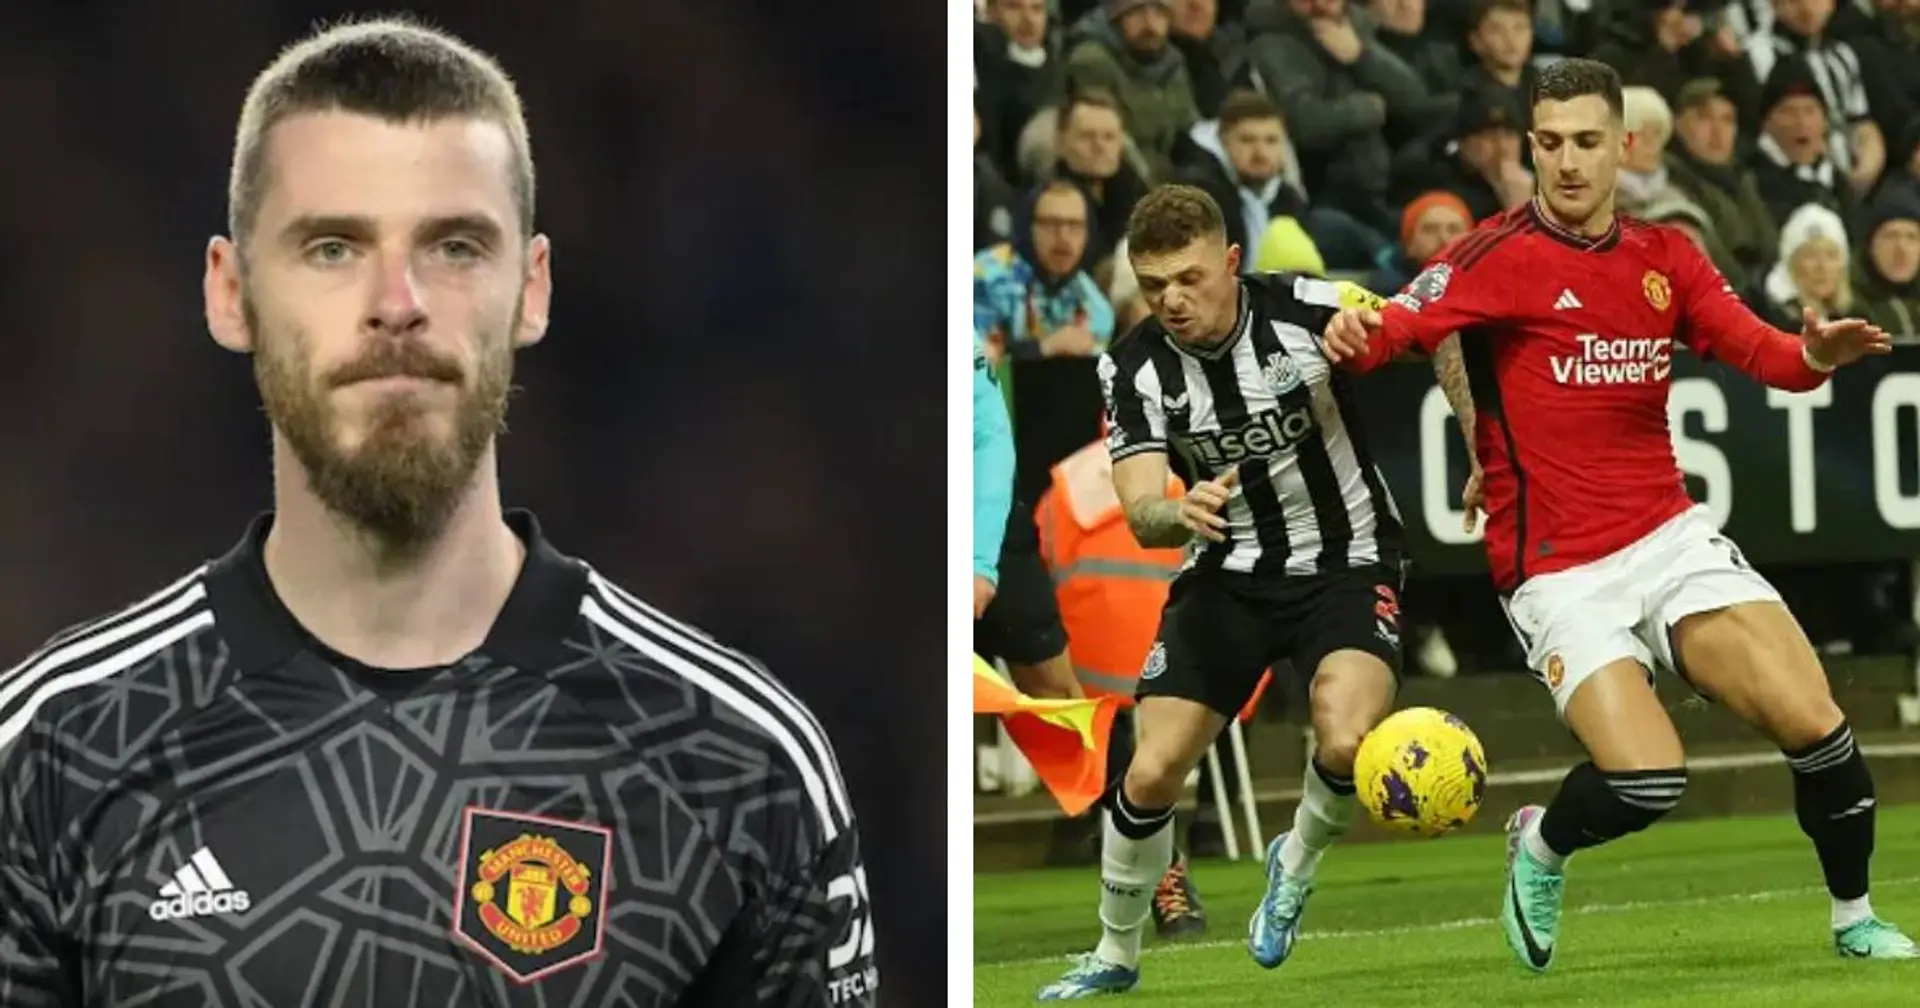 De Gea once again posts cryptic message as Man United lose to Newcastle